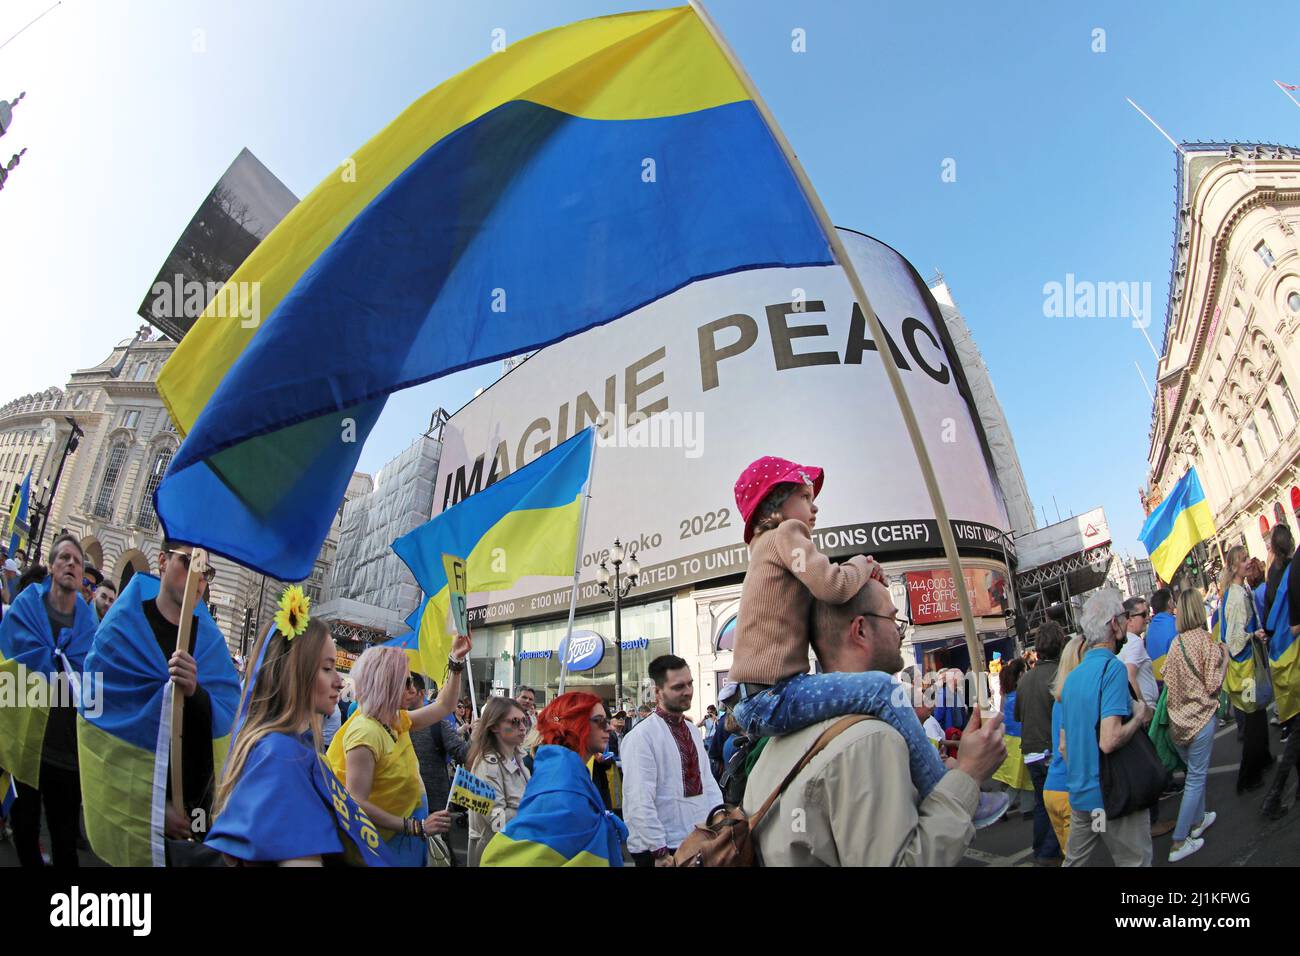 London, UK. 26th Mar, 2022. Participants in the London Stands with Ukraine march in London passing Piccadilly Circus where Yoko Ono's Imagine Peace was displayed in support of Ukraine against the Russian invasion and war Credit: Paul Brown/Alamy Live News Stock Photo